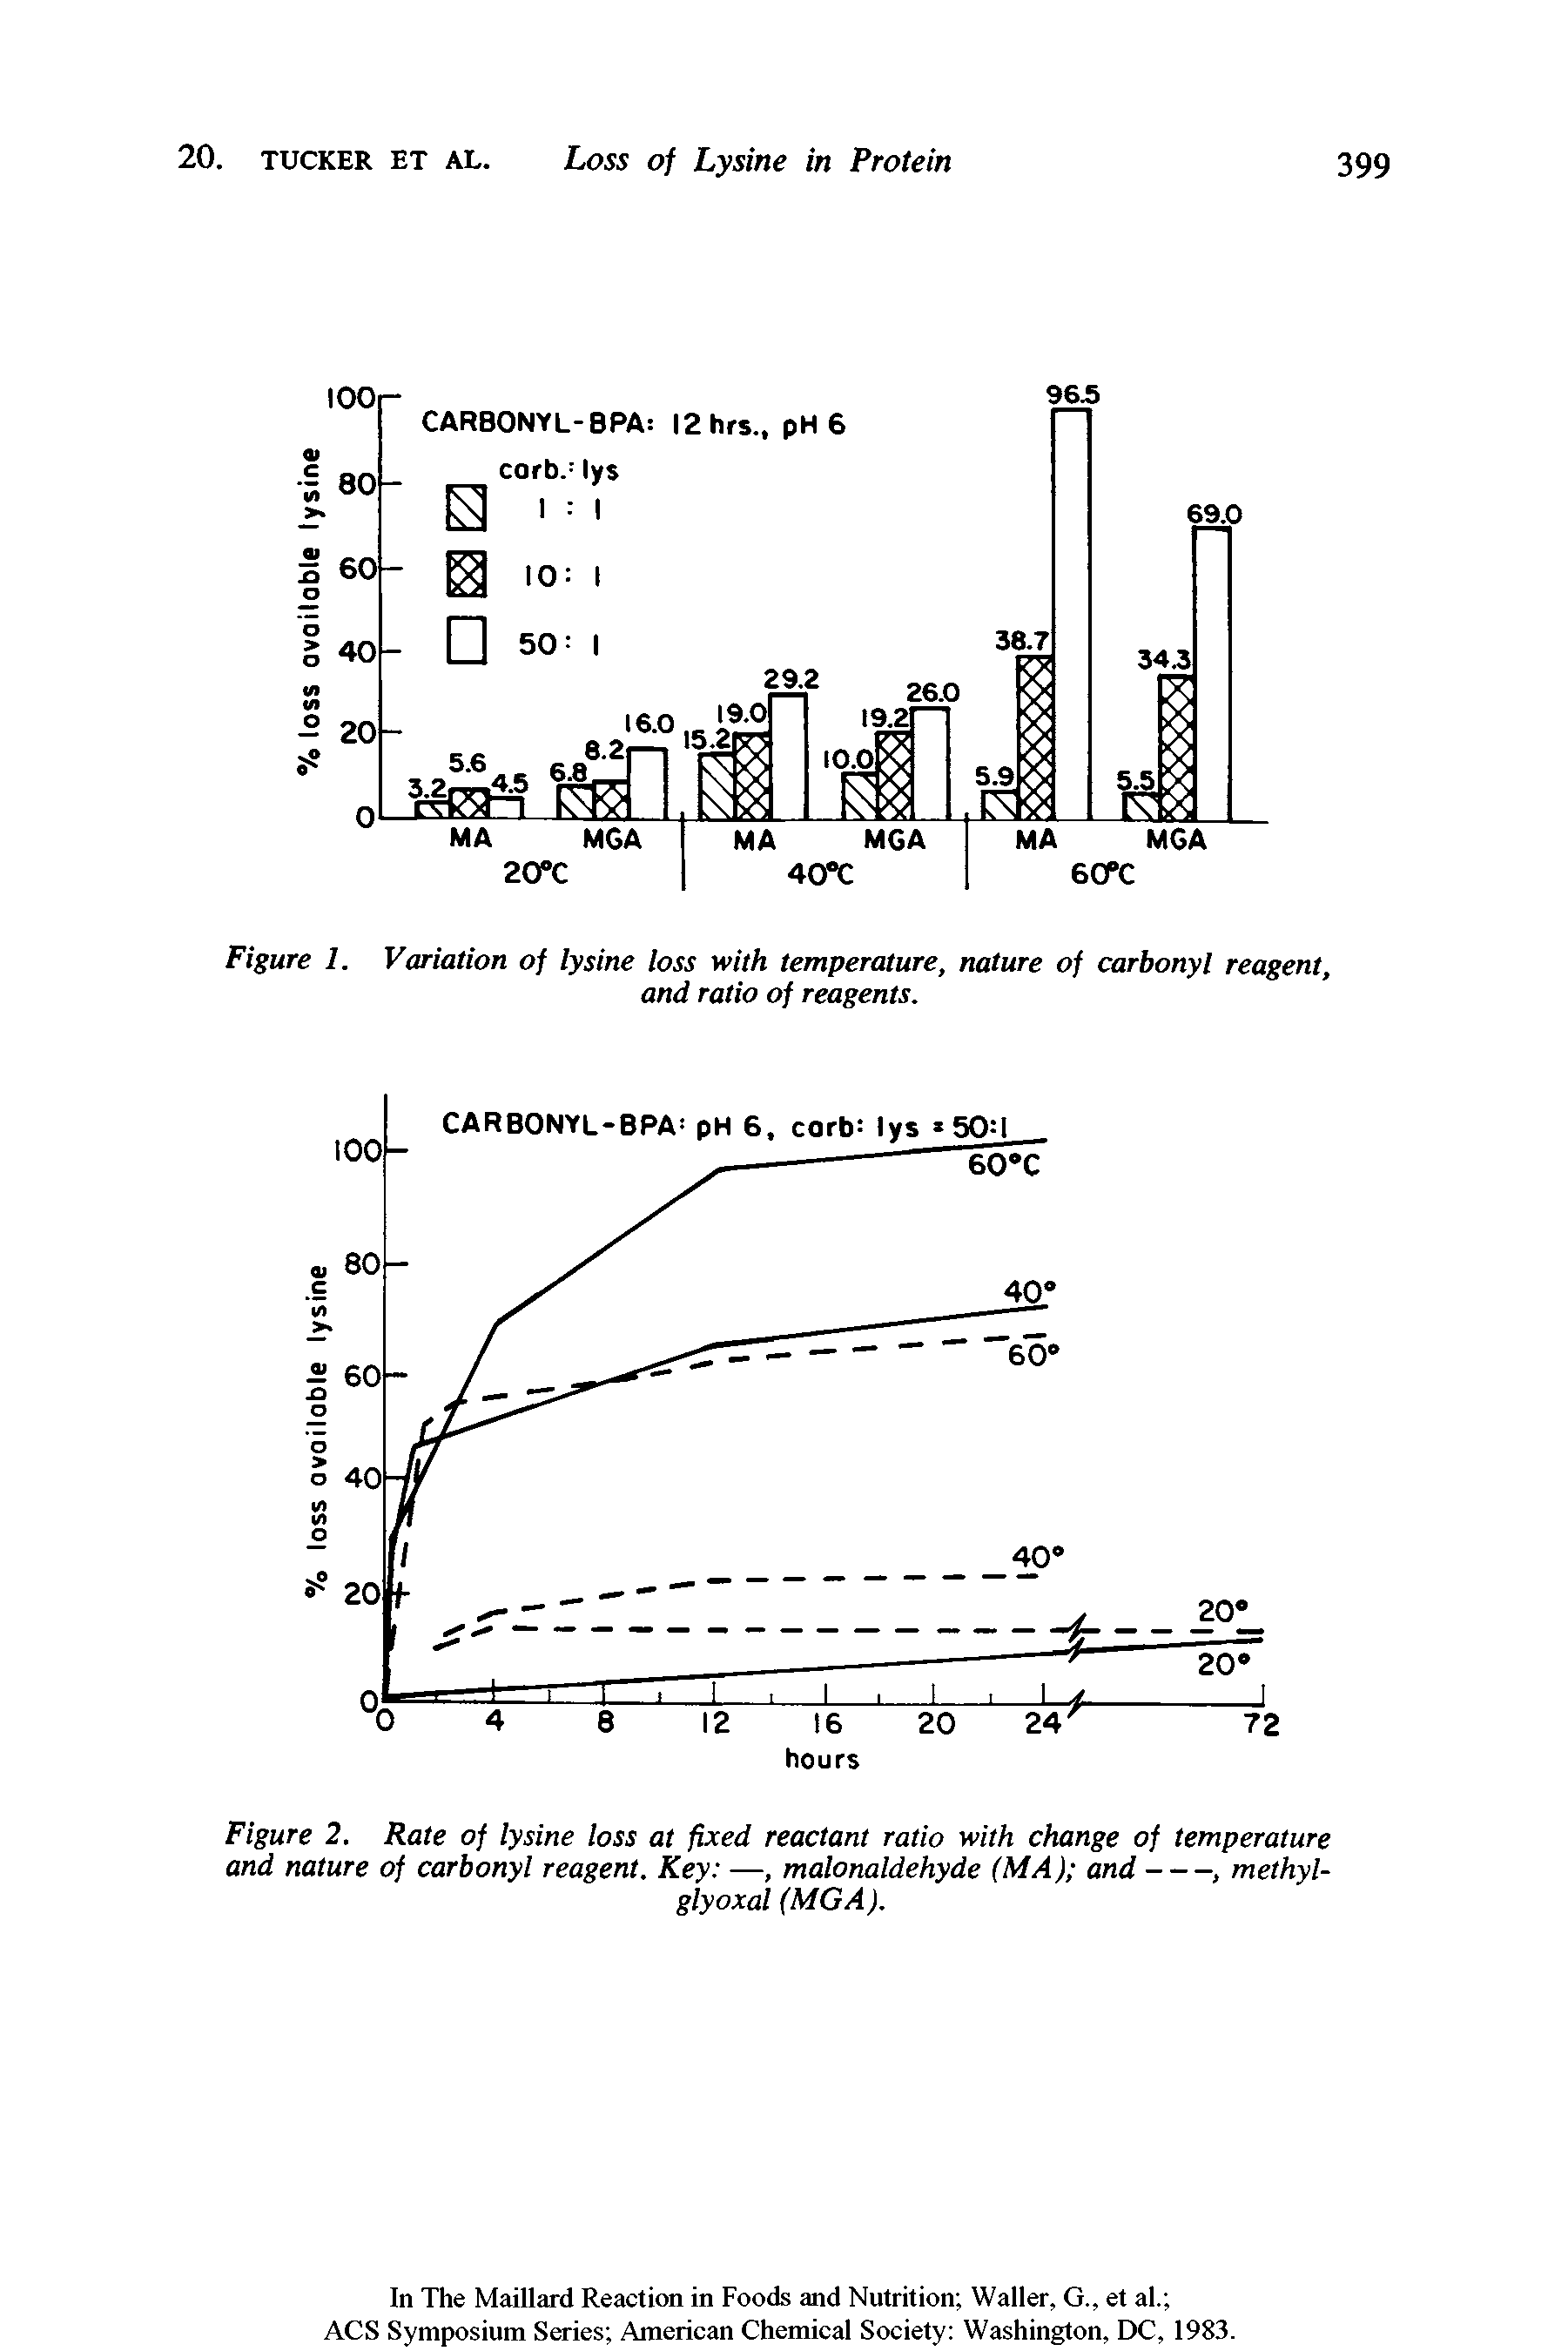 Figure 2. Rate of lysine loss at fixed reactant ratio with change of temperature...